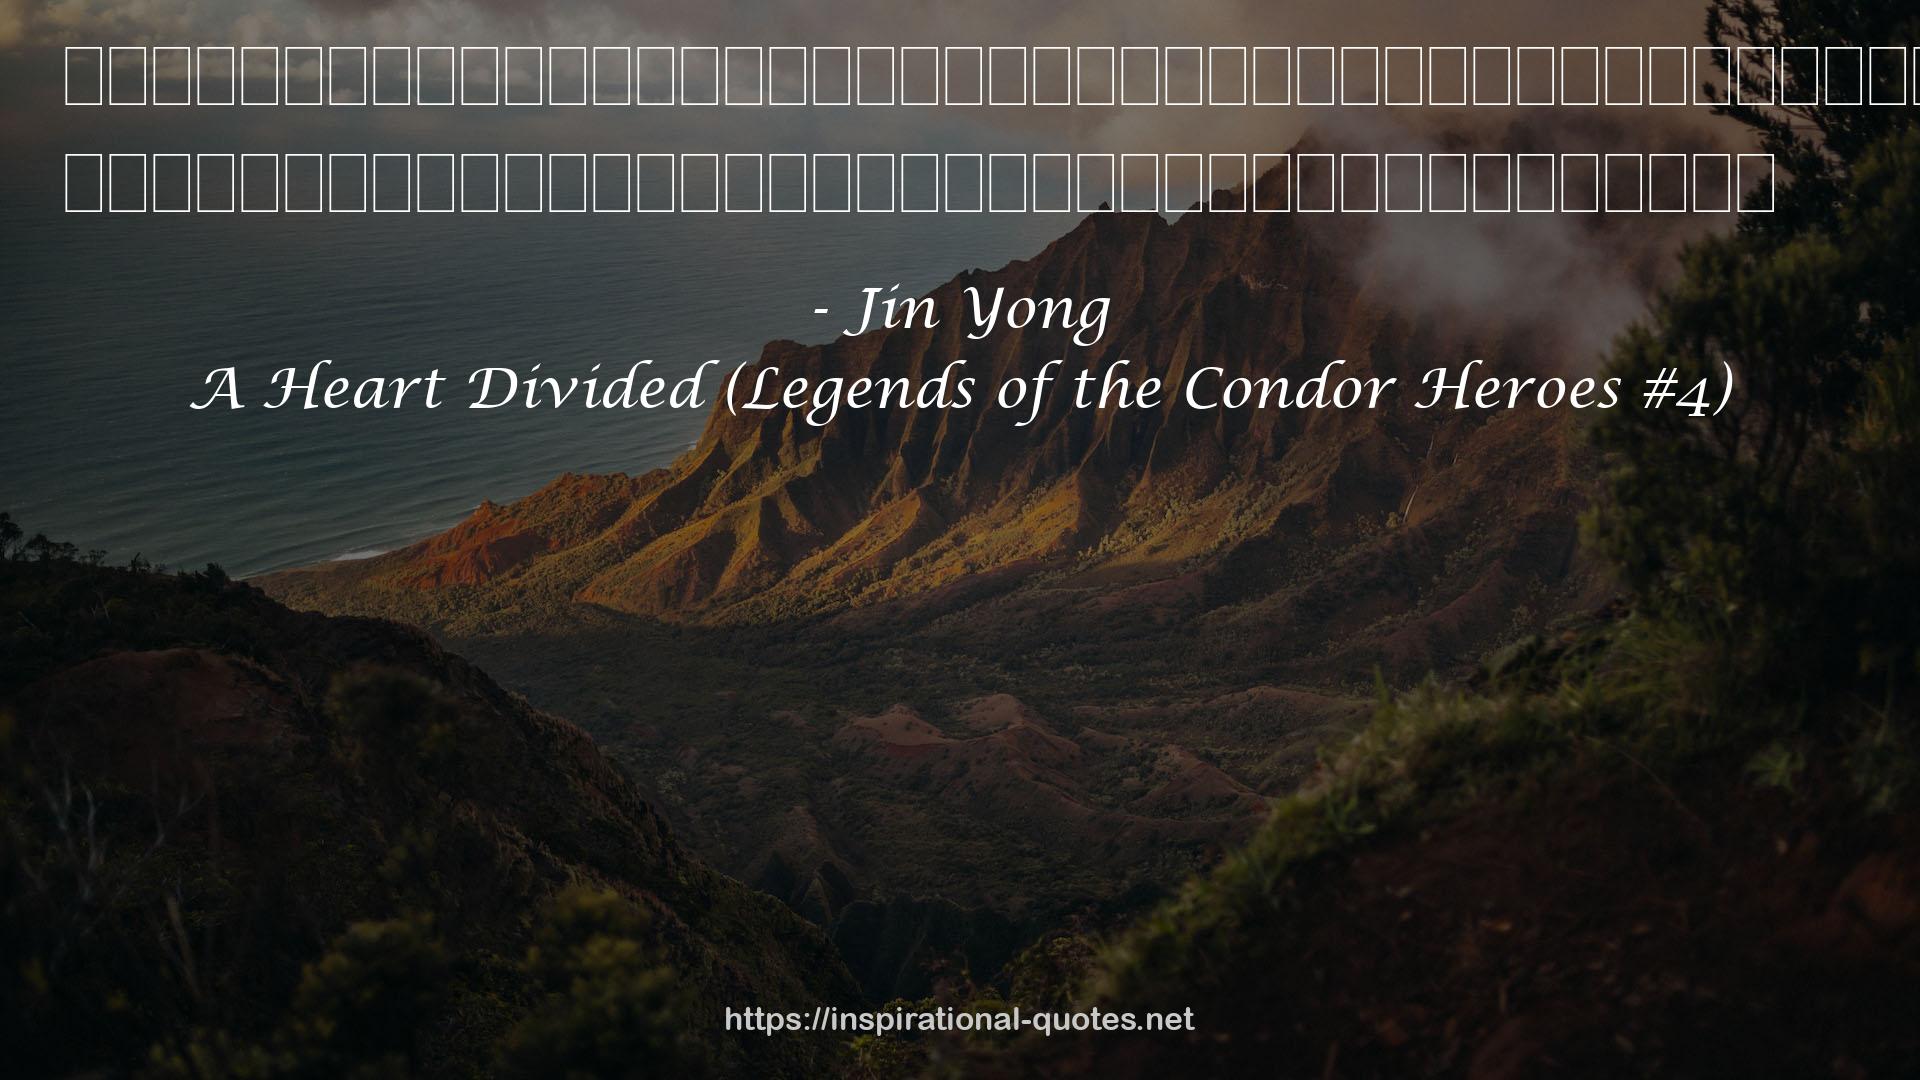 A Heart Divided (Legends of the Condor Heroes #4) QUOTES